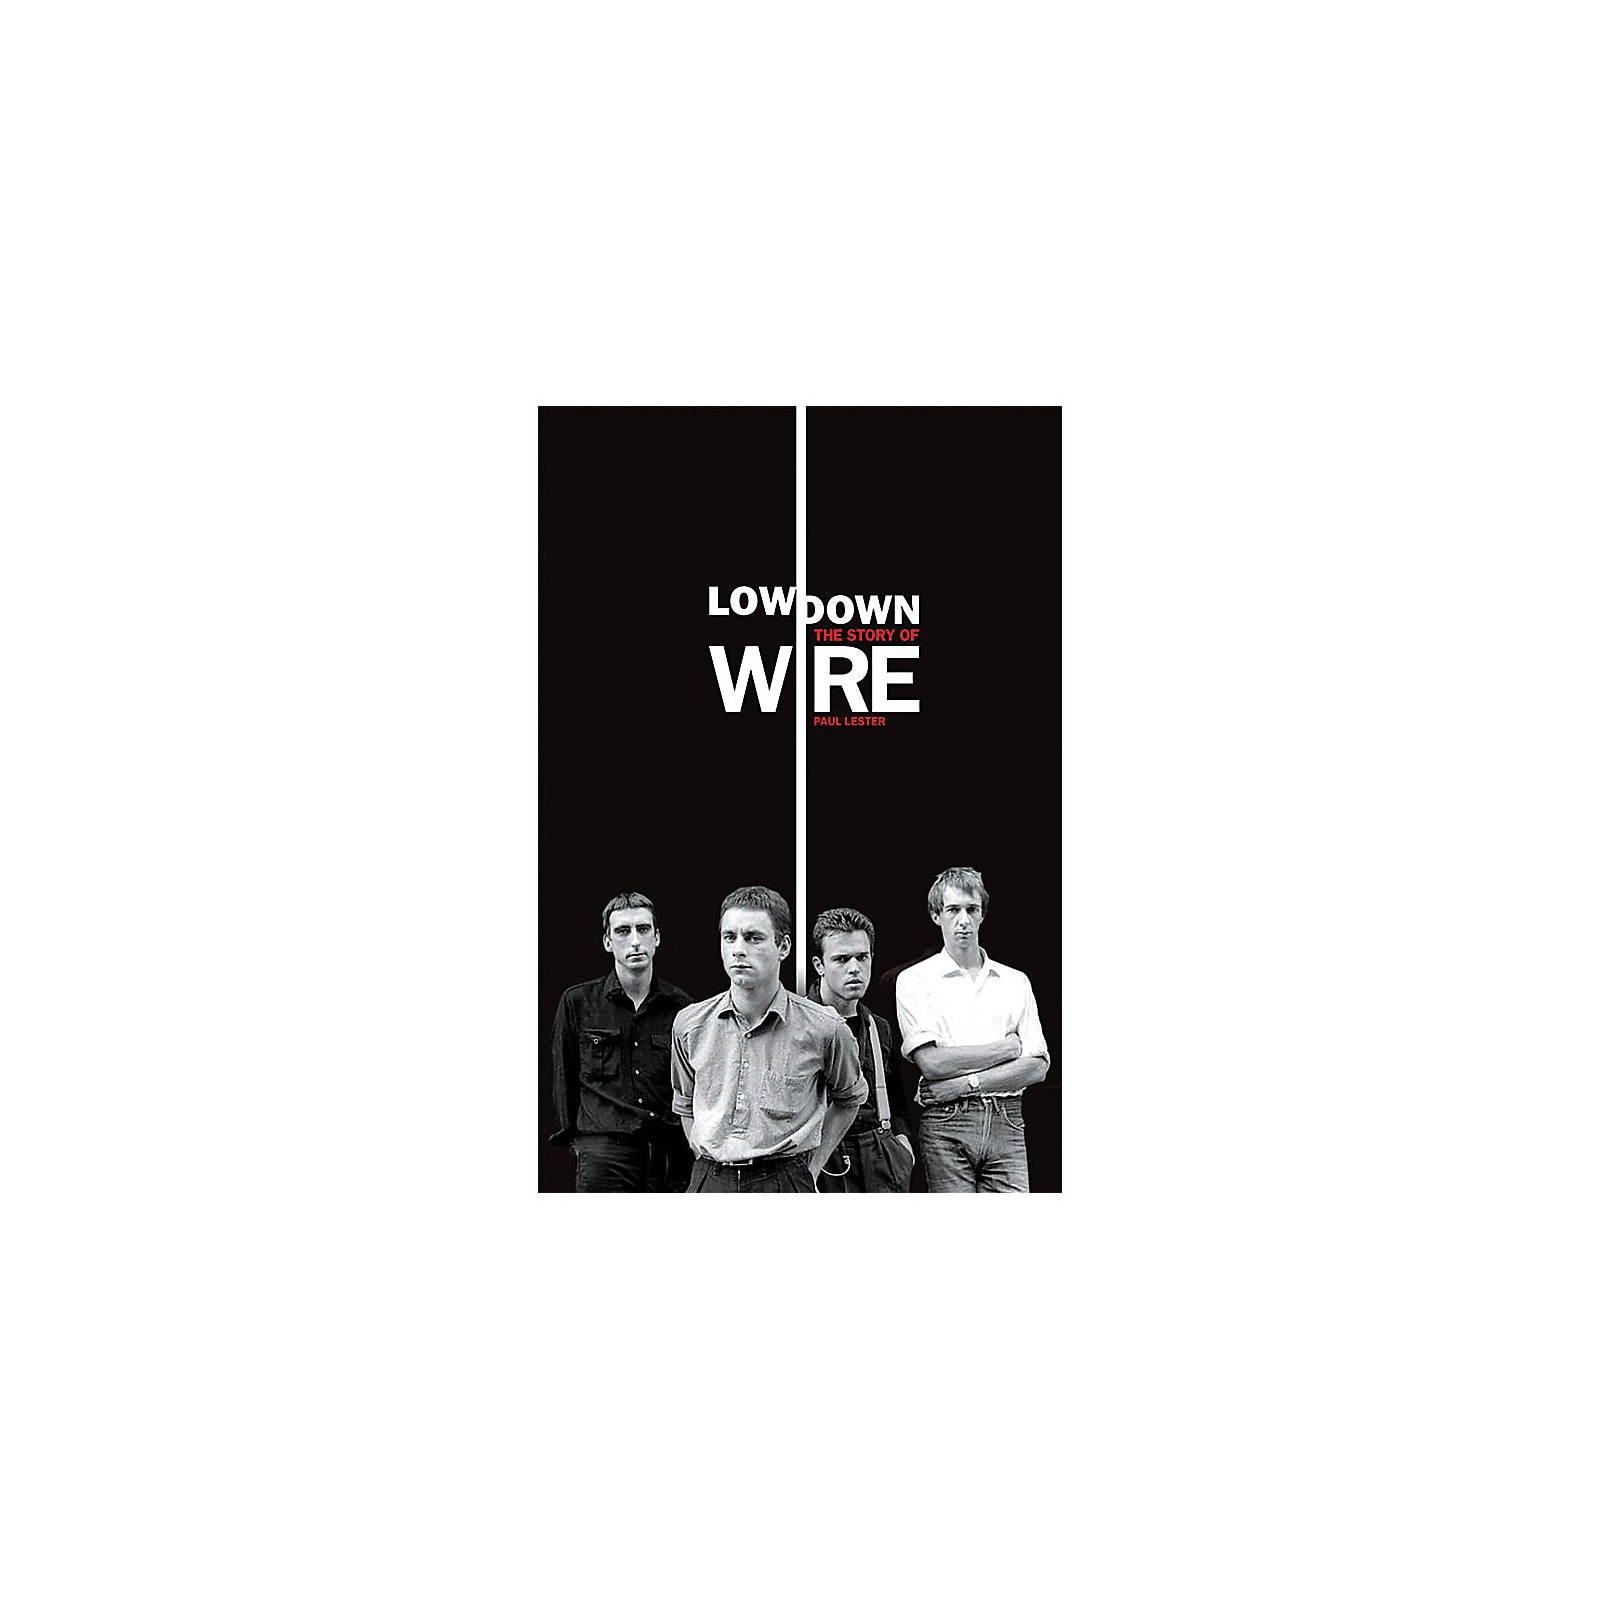 Omnibus Lowdown - The Story of Wire Omnibus Press Series Softcover ...